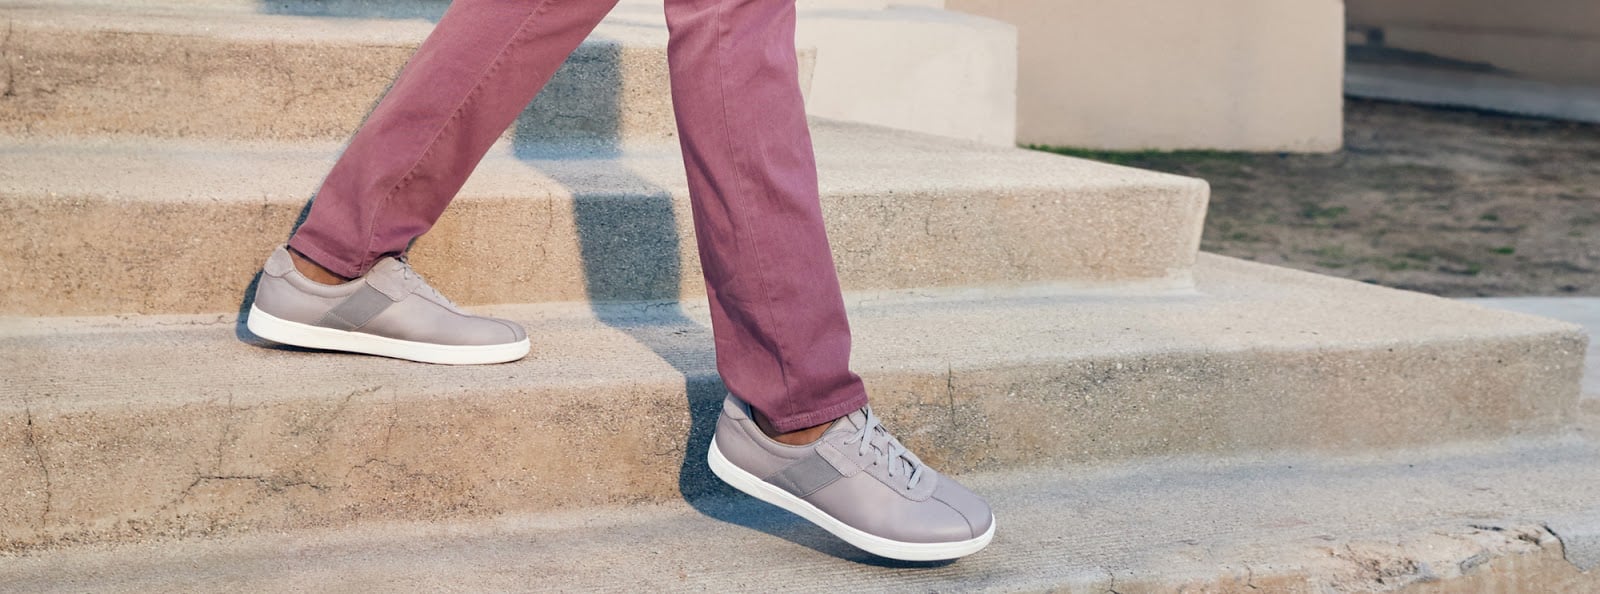 How to Buy Comfortable Sneakers for Wide Feet